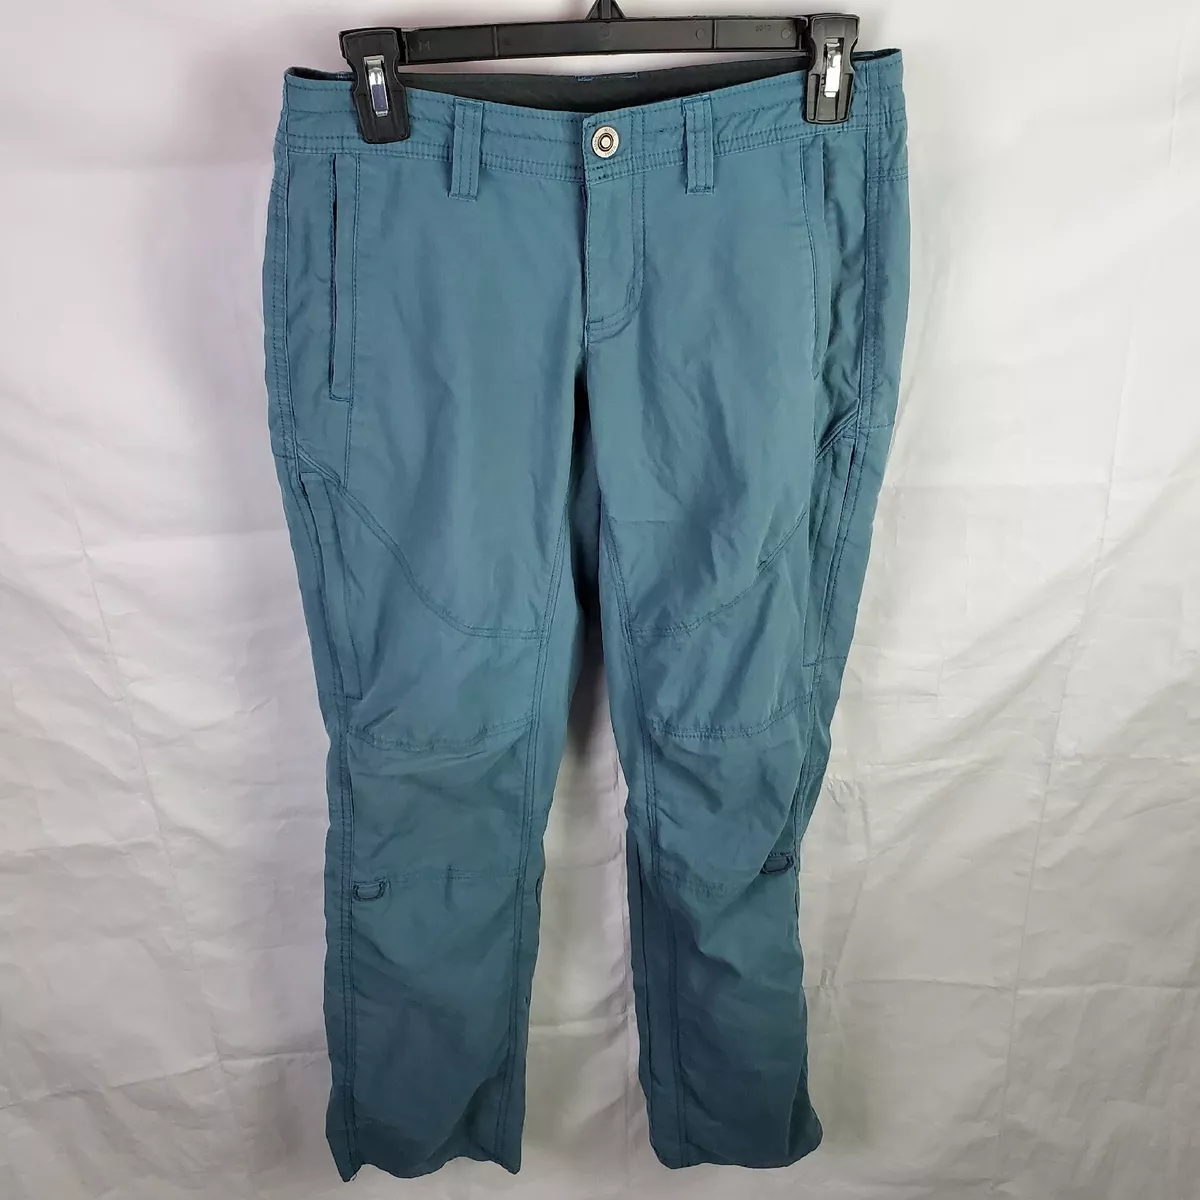 Kuhl Spire Roll Up Pants Hiking Pockets Style 6279 Blue Women's 4